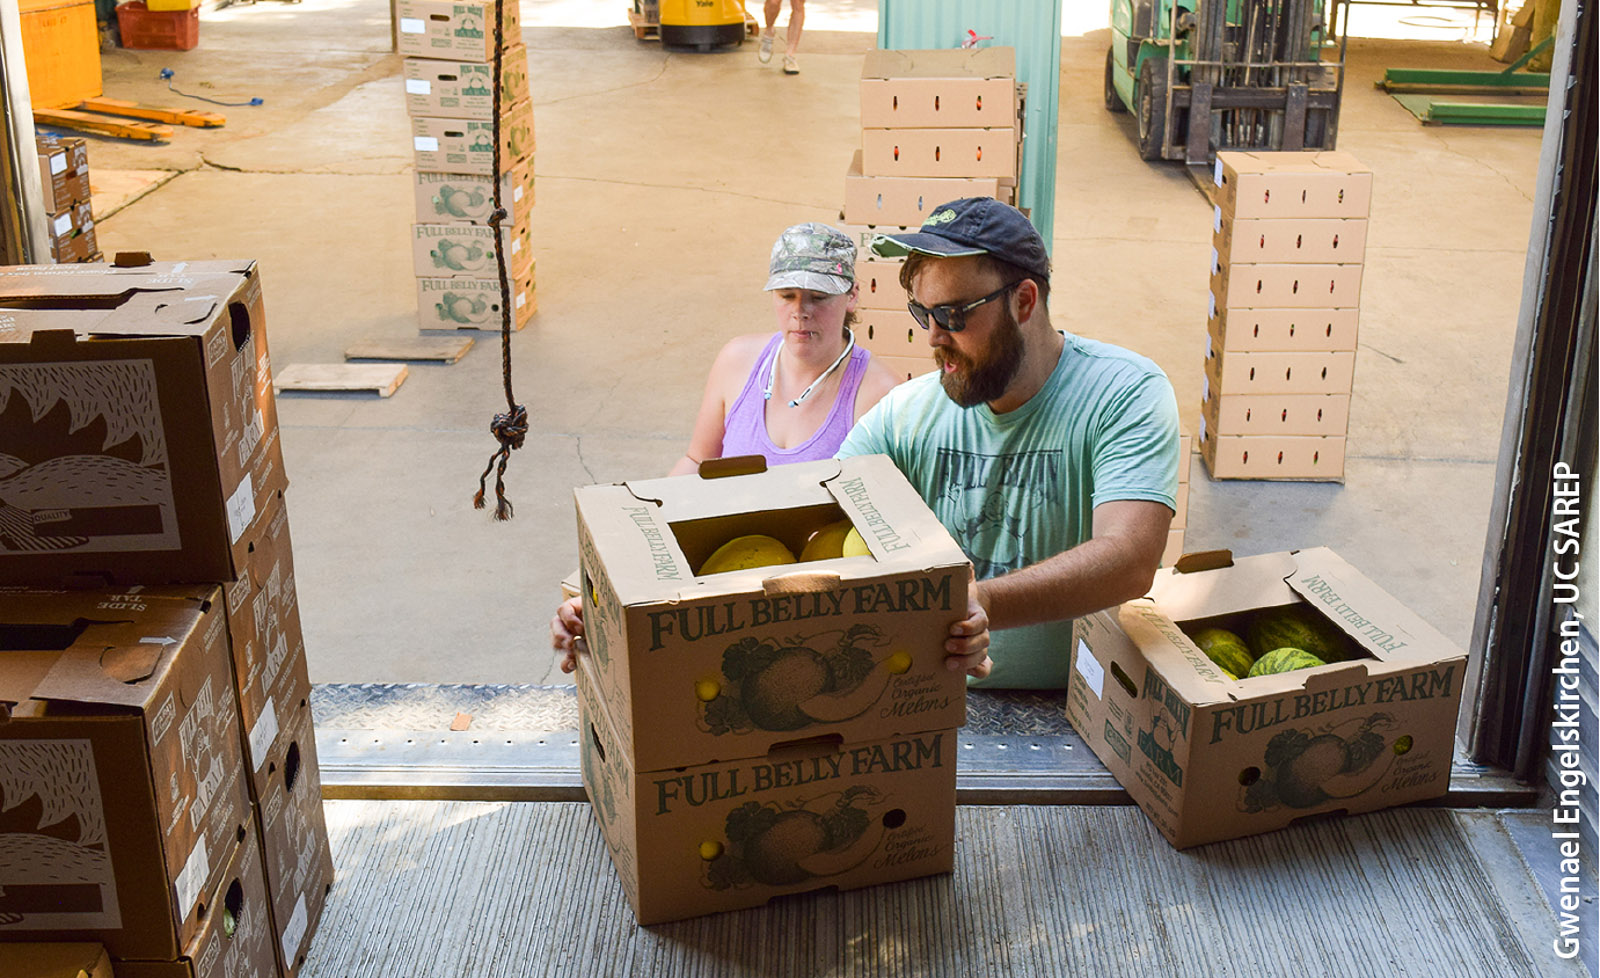 Boxes of melons from Full Belly Farm in Yolo County are loaded into Capay Valley Farm Shop's truck. The truck collects produce from multiple farms in the region for delivery to buyers in the Bay Area.